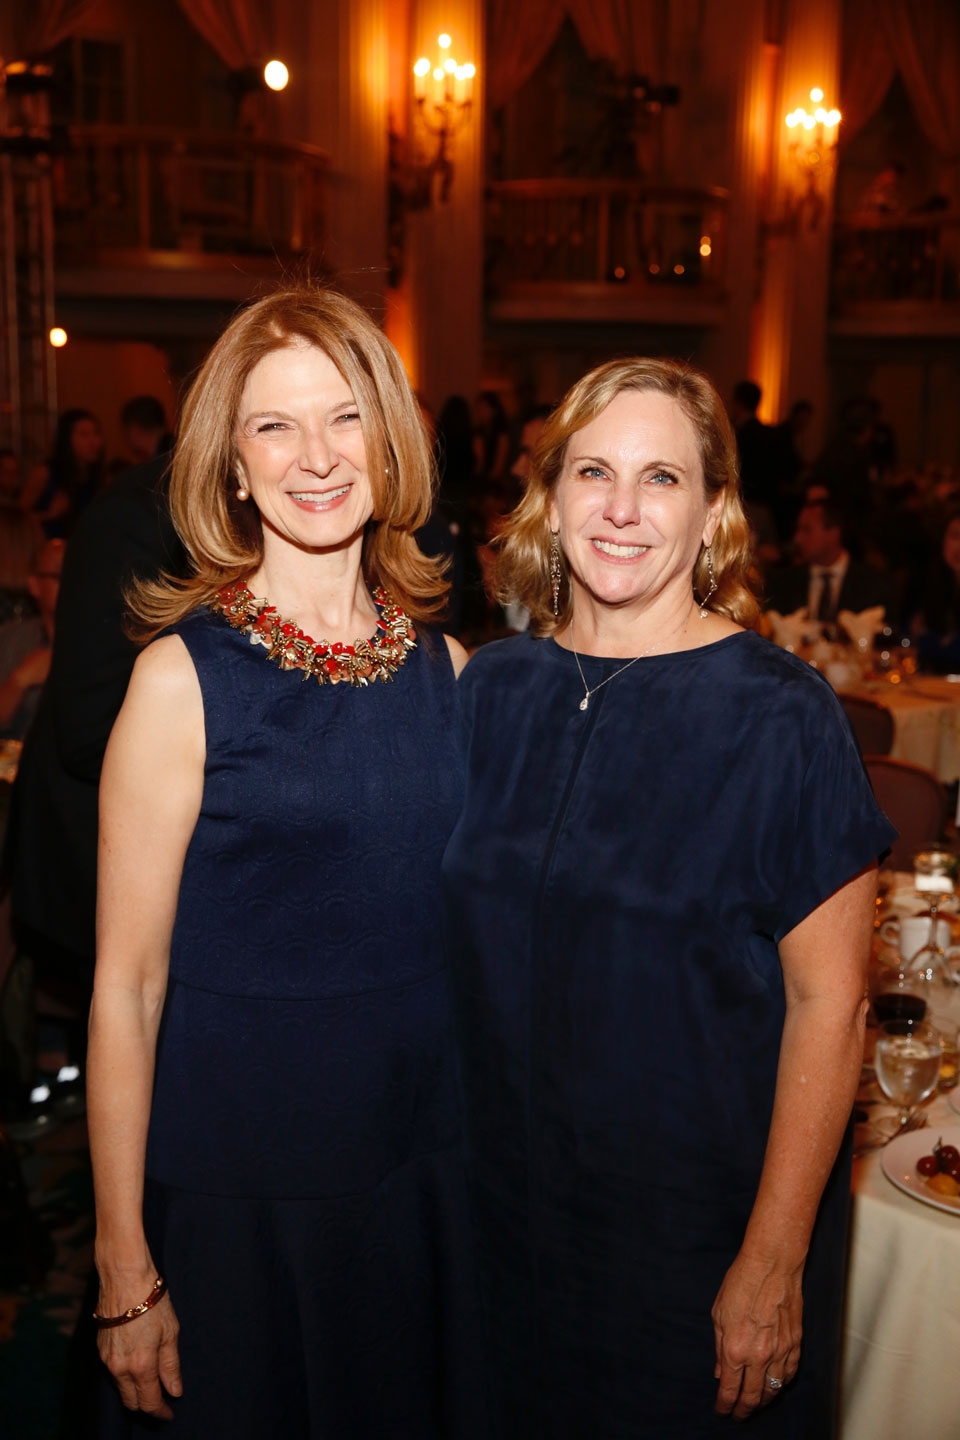 2016 U.S.-China Film Gala Dinner, Los Angeles, California - 2 Nov 2016
From left, Dawn Hudson, CEO of the Academy of Motion Picture Arts and Sciences and Melissa Cobb, Head of Studio and Chief Creative Officer Oriental DreamWorks pose during the 2016 U.S.-China Film Gala Dinner held at the Millennium Biltmore Hotel on Wednesday, November 2, 2016, in Los Angeles, California. 